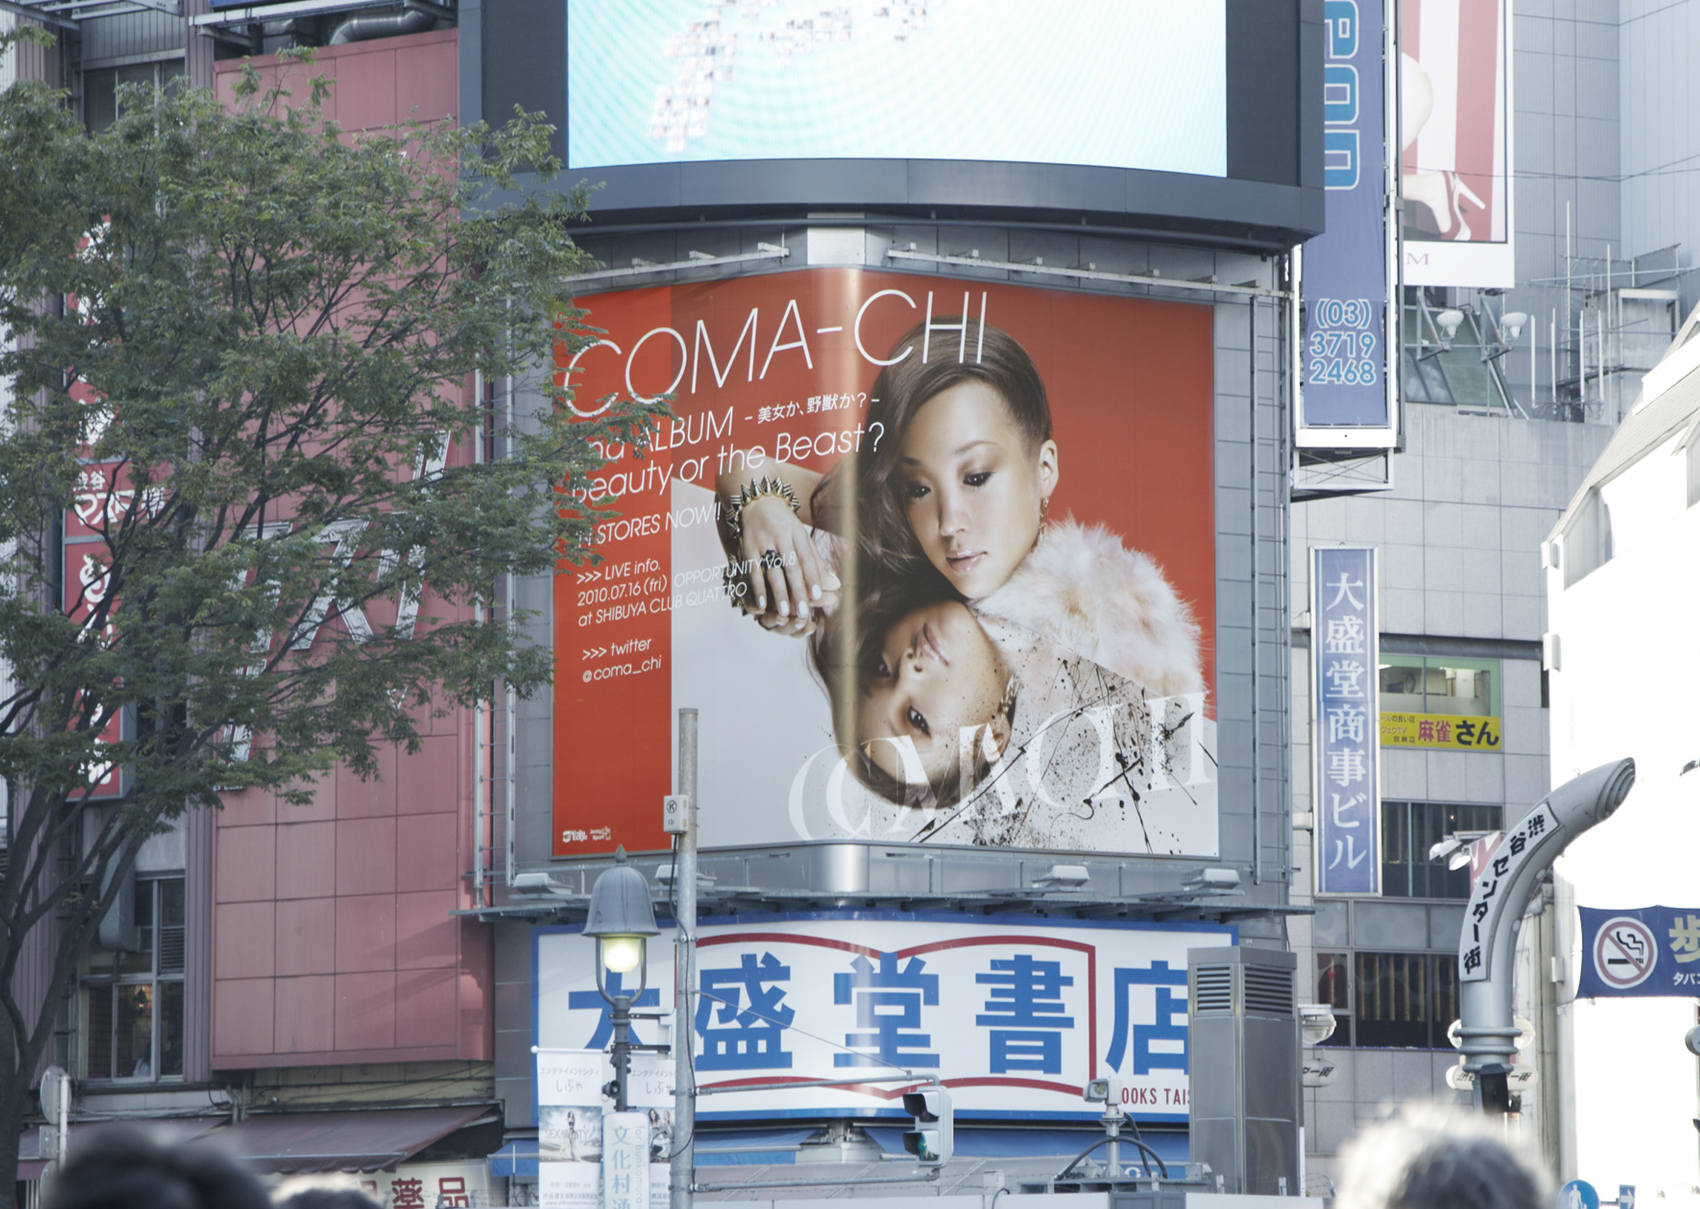 COMA-CHI_Beauty or Beast?